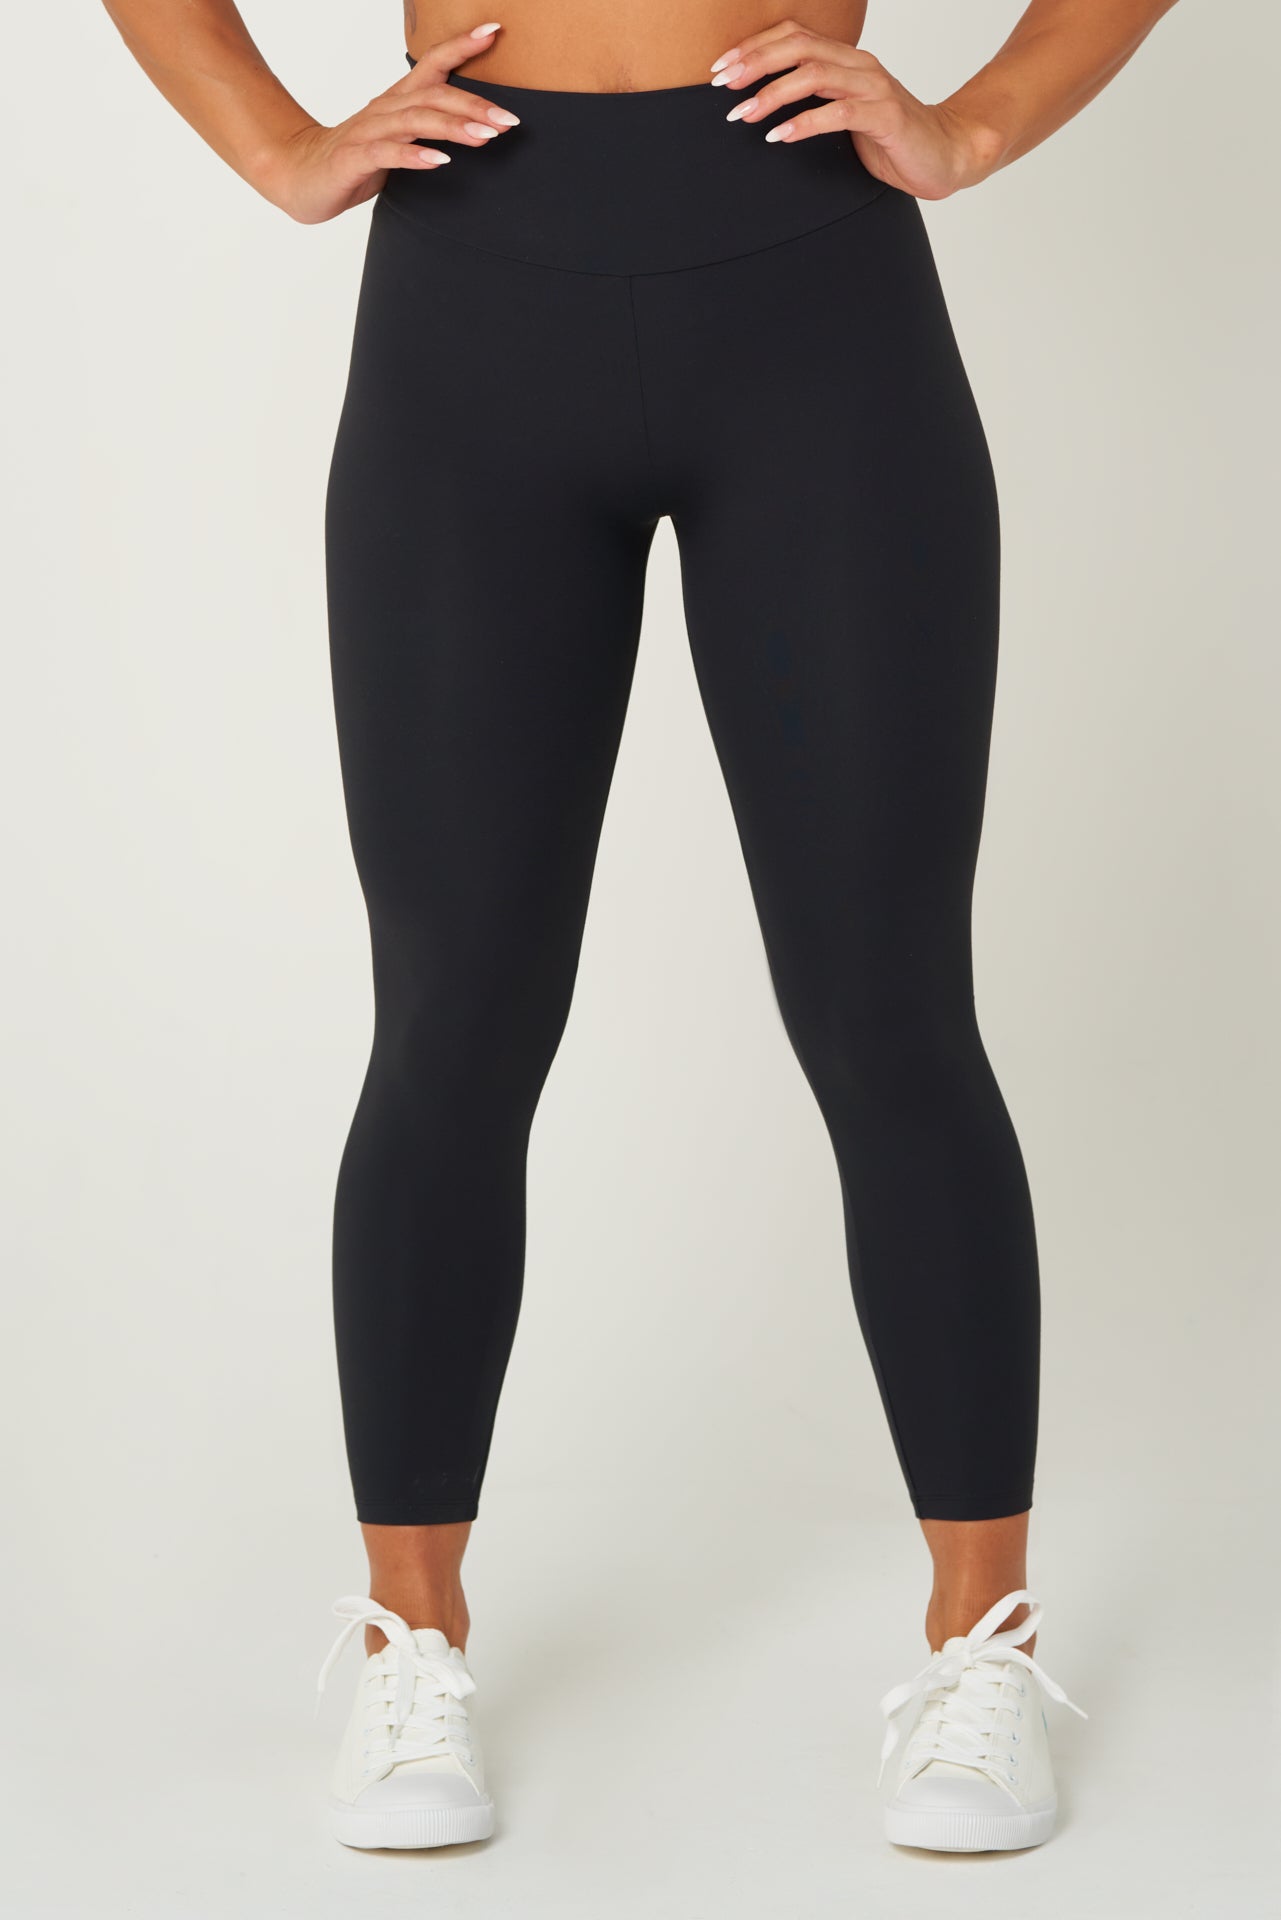 Find Your Perfect Fit with Scrunch Leggings